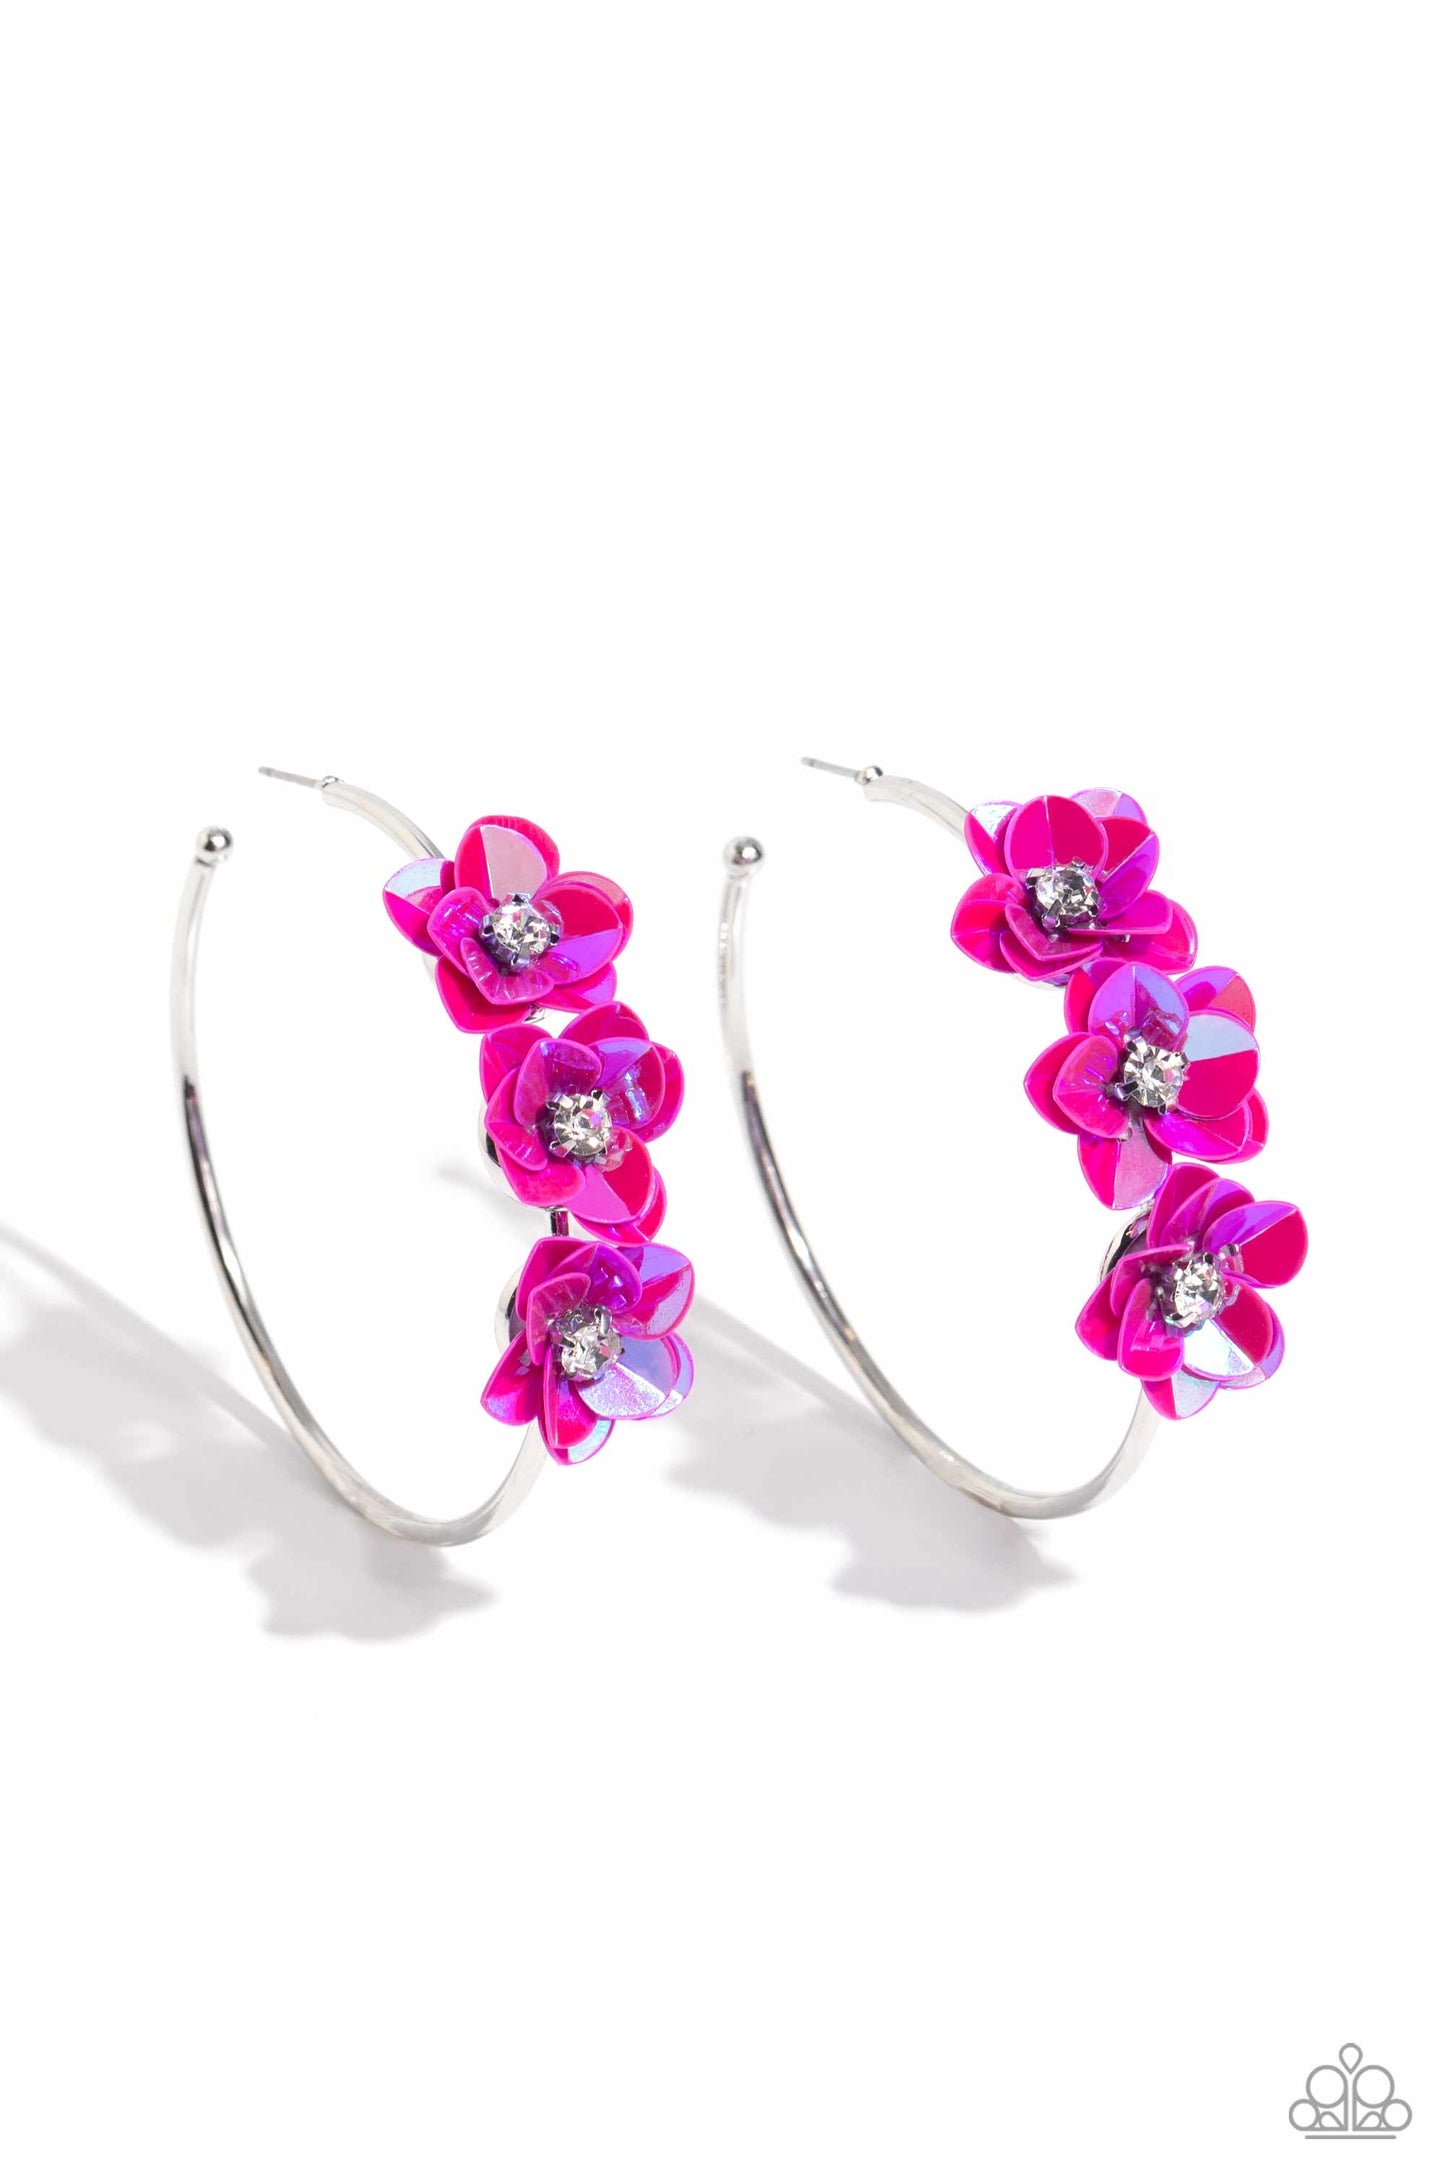 Ethereal Embellishment Pink Flower Hoop Earring - Paparazzi Accessories  A trio of Fuchsia Fedora flowers, featuring an iridescent sheen and dotted with white pronged rhinestone centers, blossoms atop a thin silver hoop for a dreamy, whimsical finish. Earring attaches to a standard post fitting. Hoop measures approximately 2 1/2" in diameter. Due to its prismatic palette, color may vary.  Sold as one pair of hoop earrings.  Sku:  P5HO-PKXX-075XX